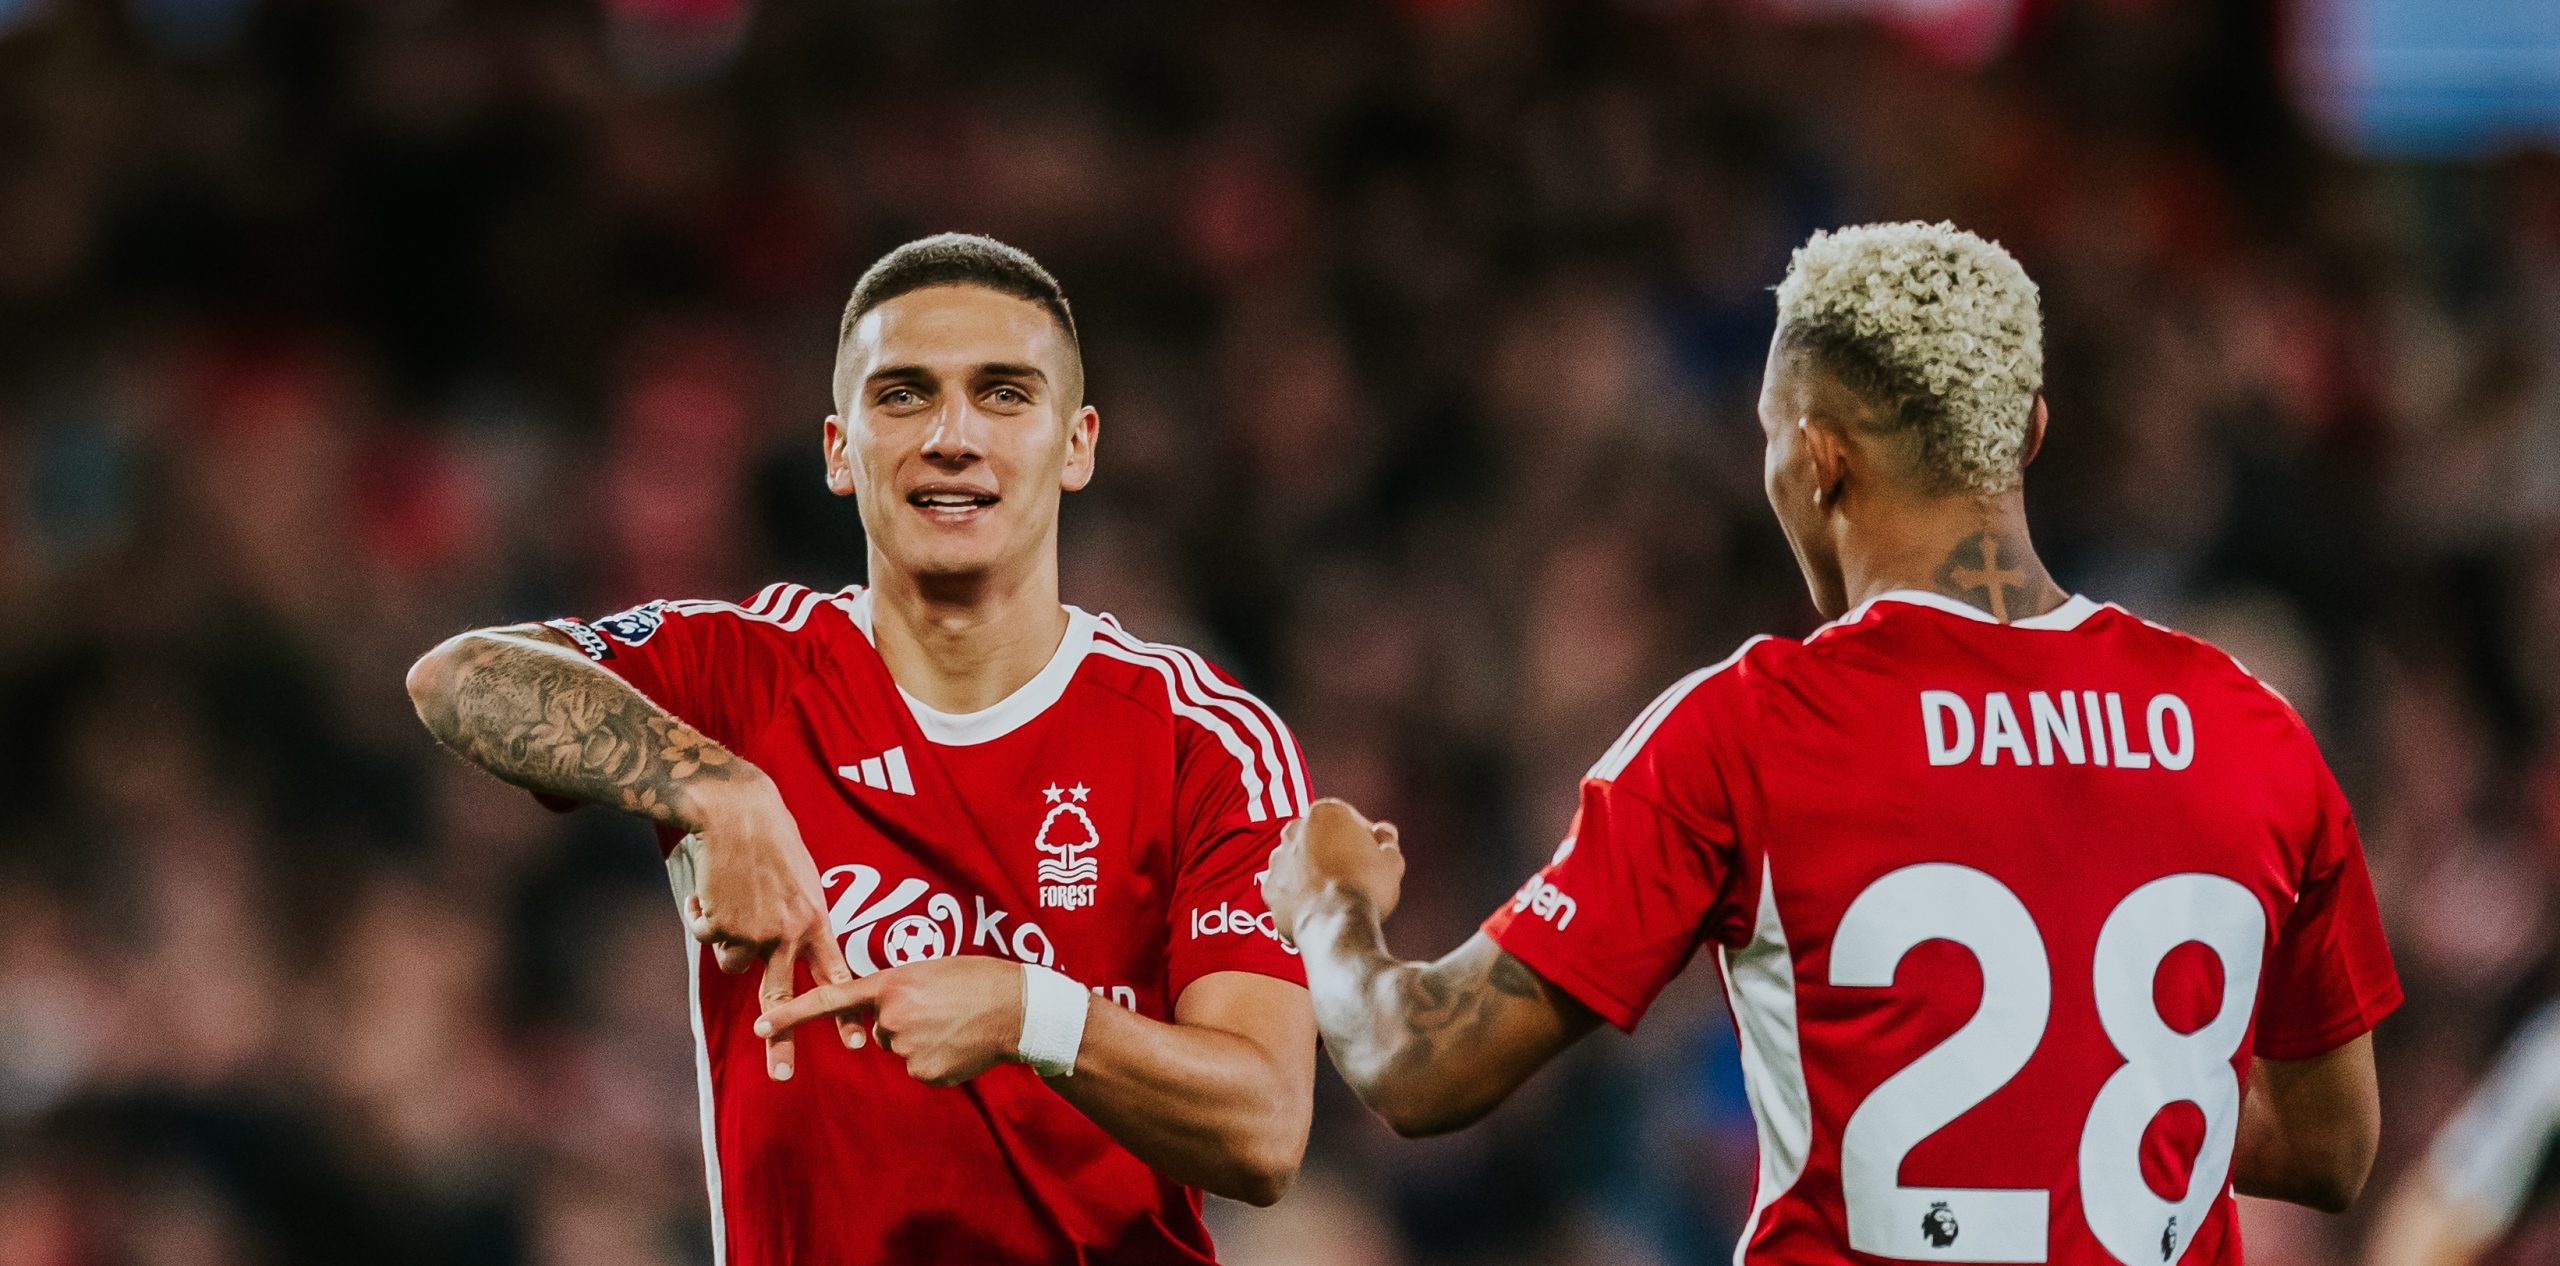 Nottingham Forest stun Manchester United with 2-1 victory 24